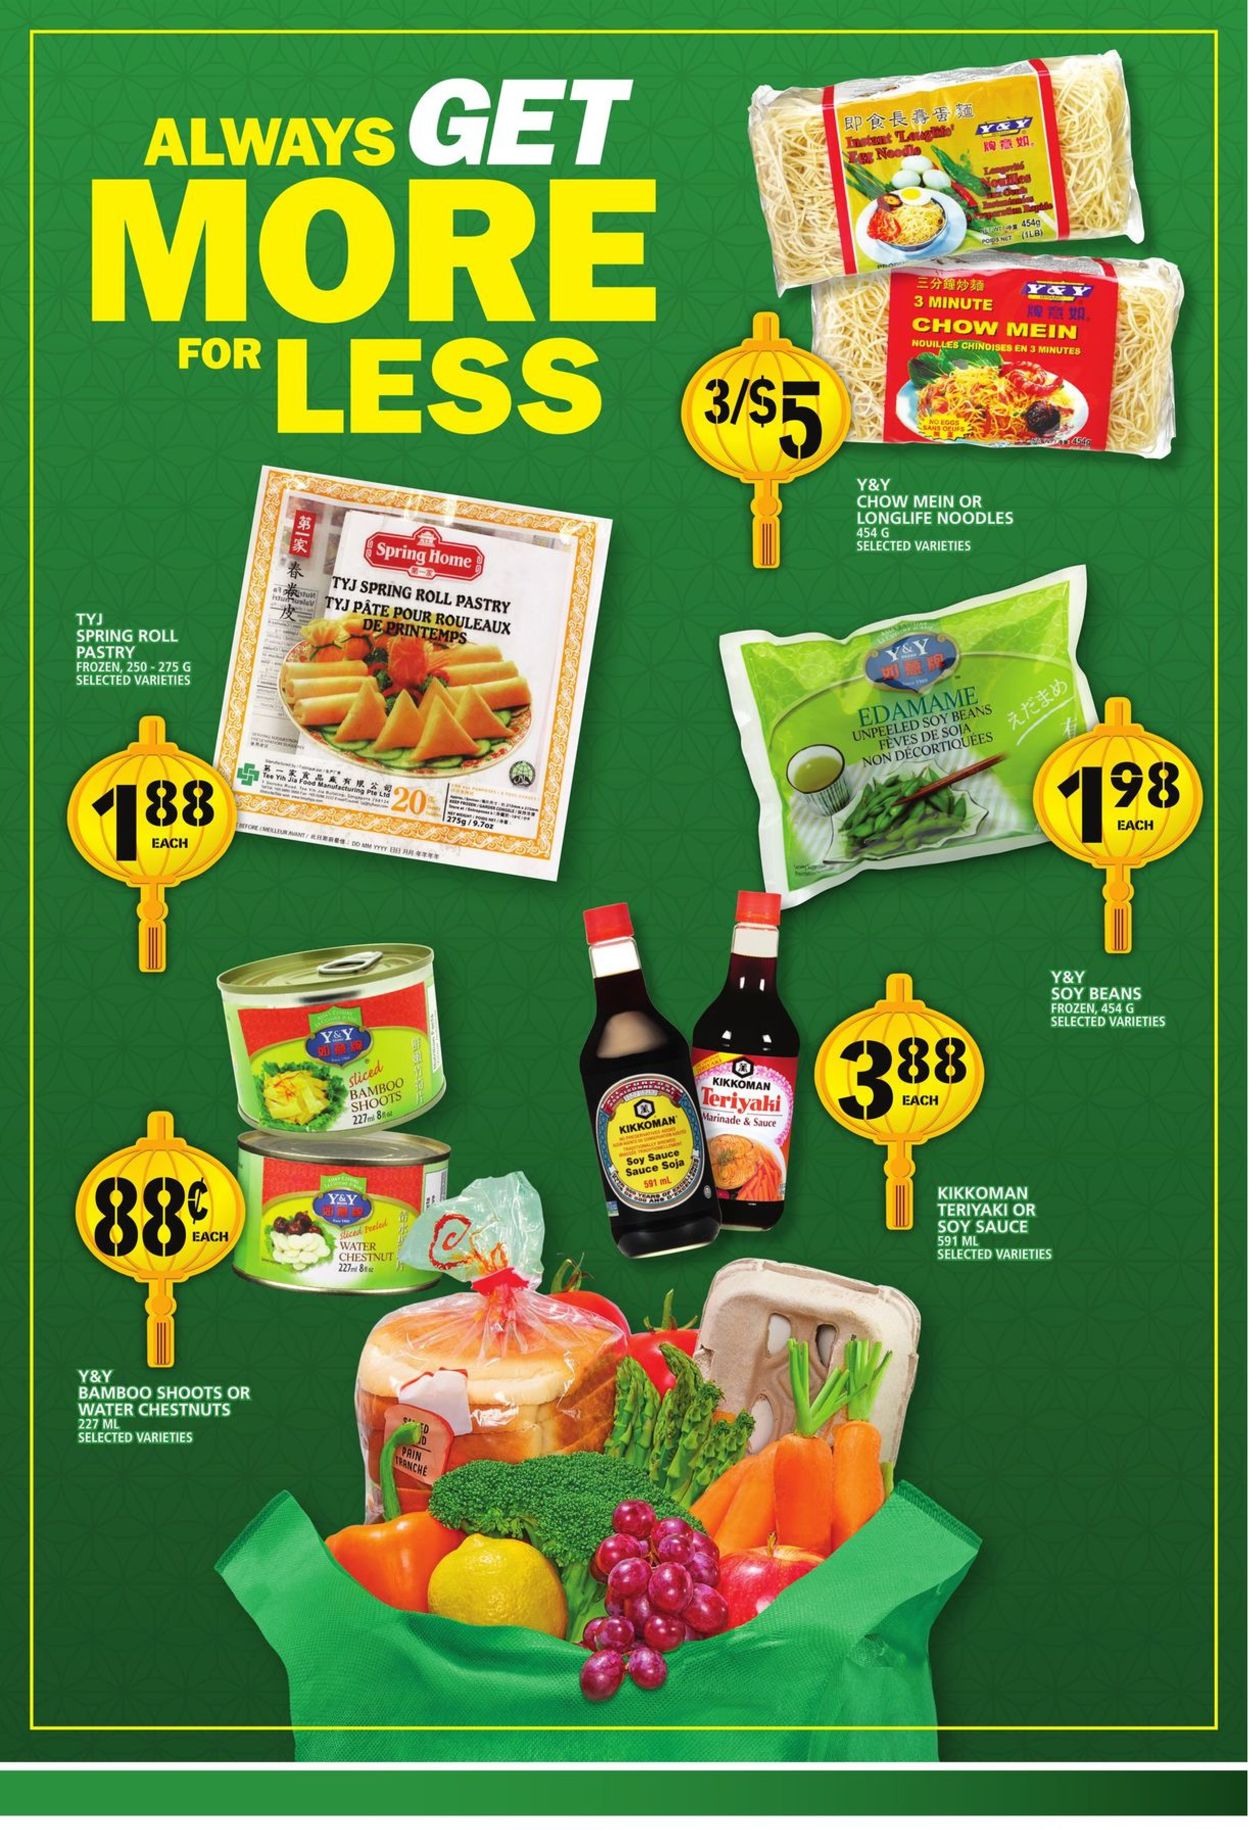 Food Basics Flyer from 01/06/2022